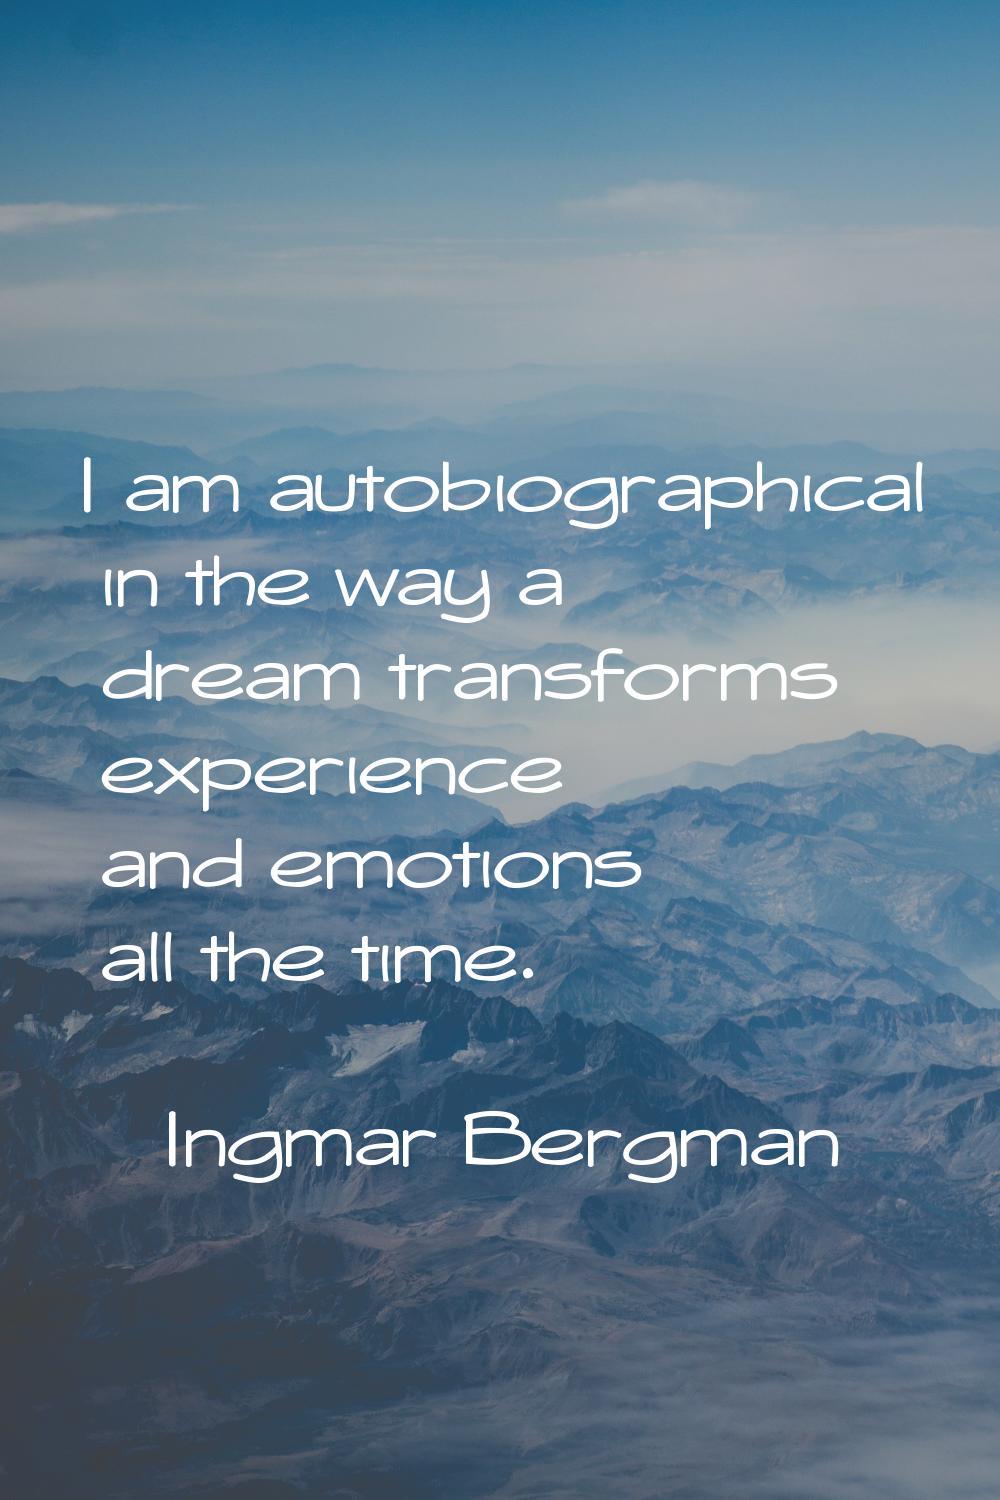 I am autobiographical in the way a dream transforms experience and emotions all the time.